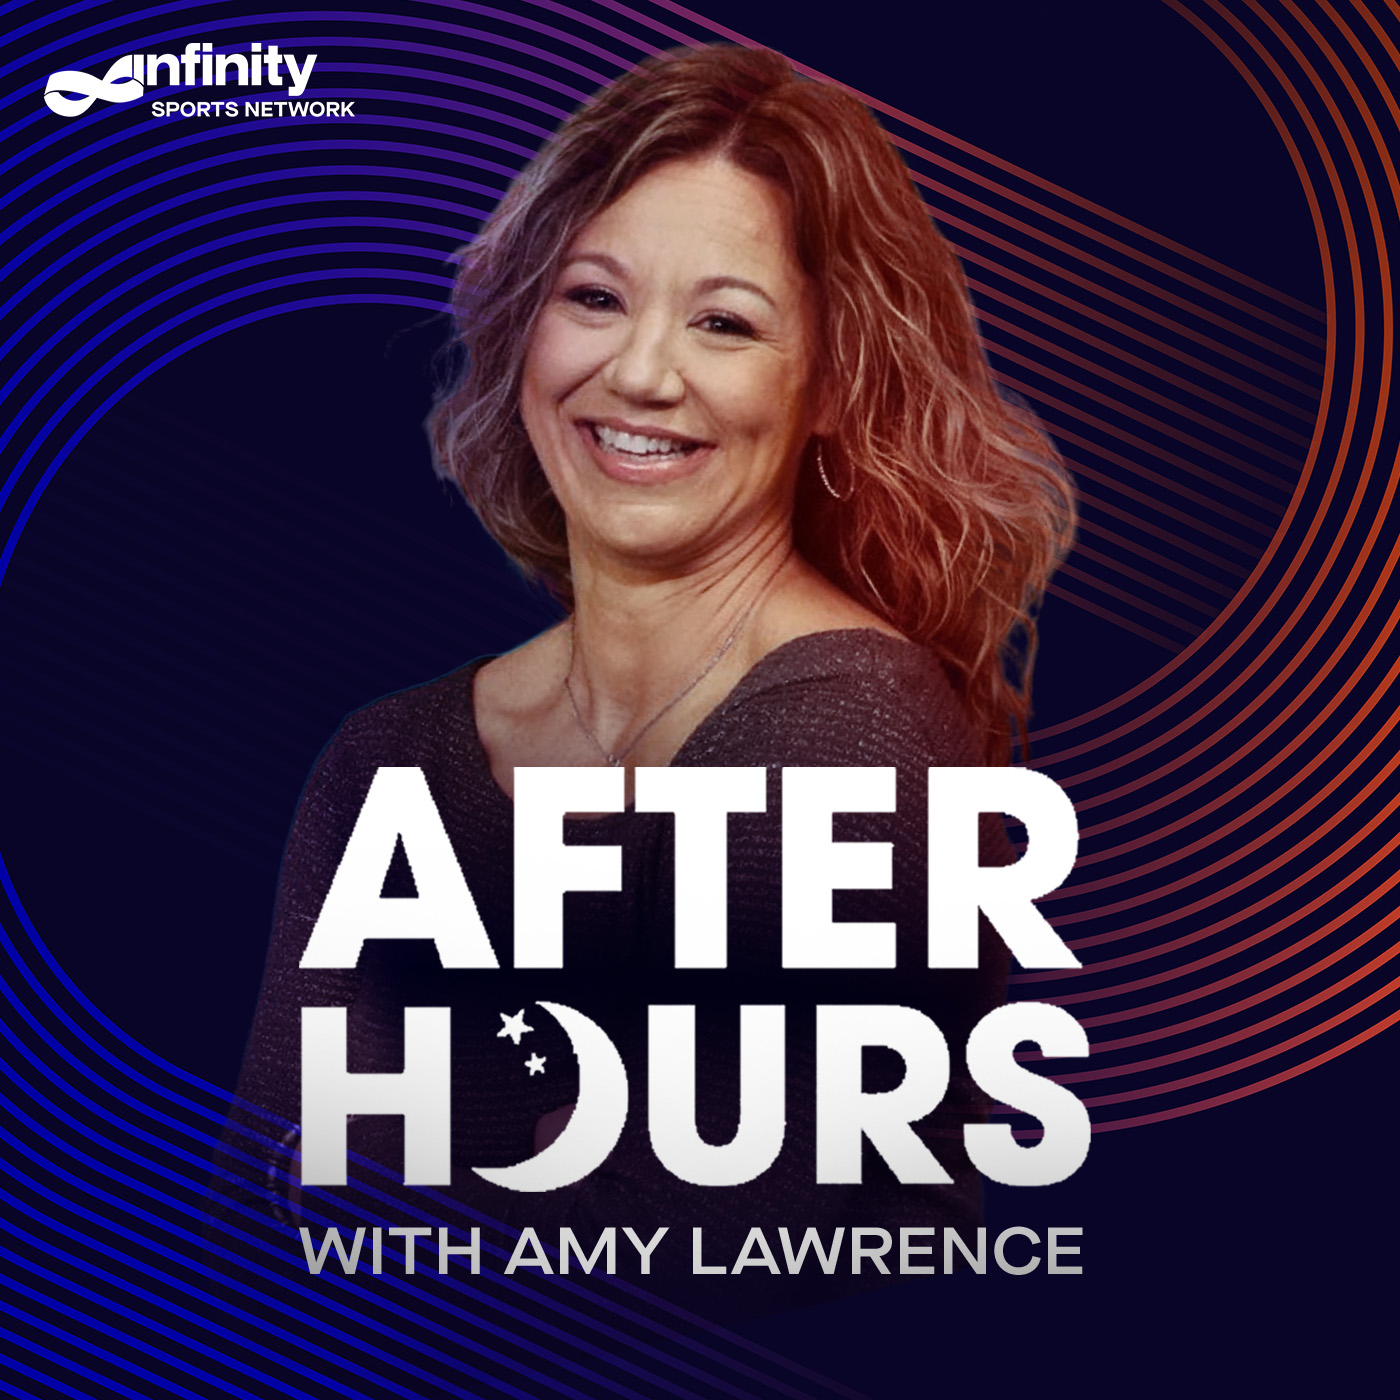 11-15-21 After Hours with Amy Lawrence PODCAST: Hour 3